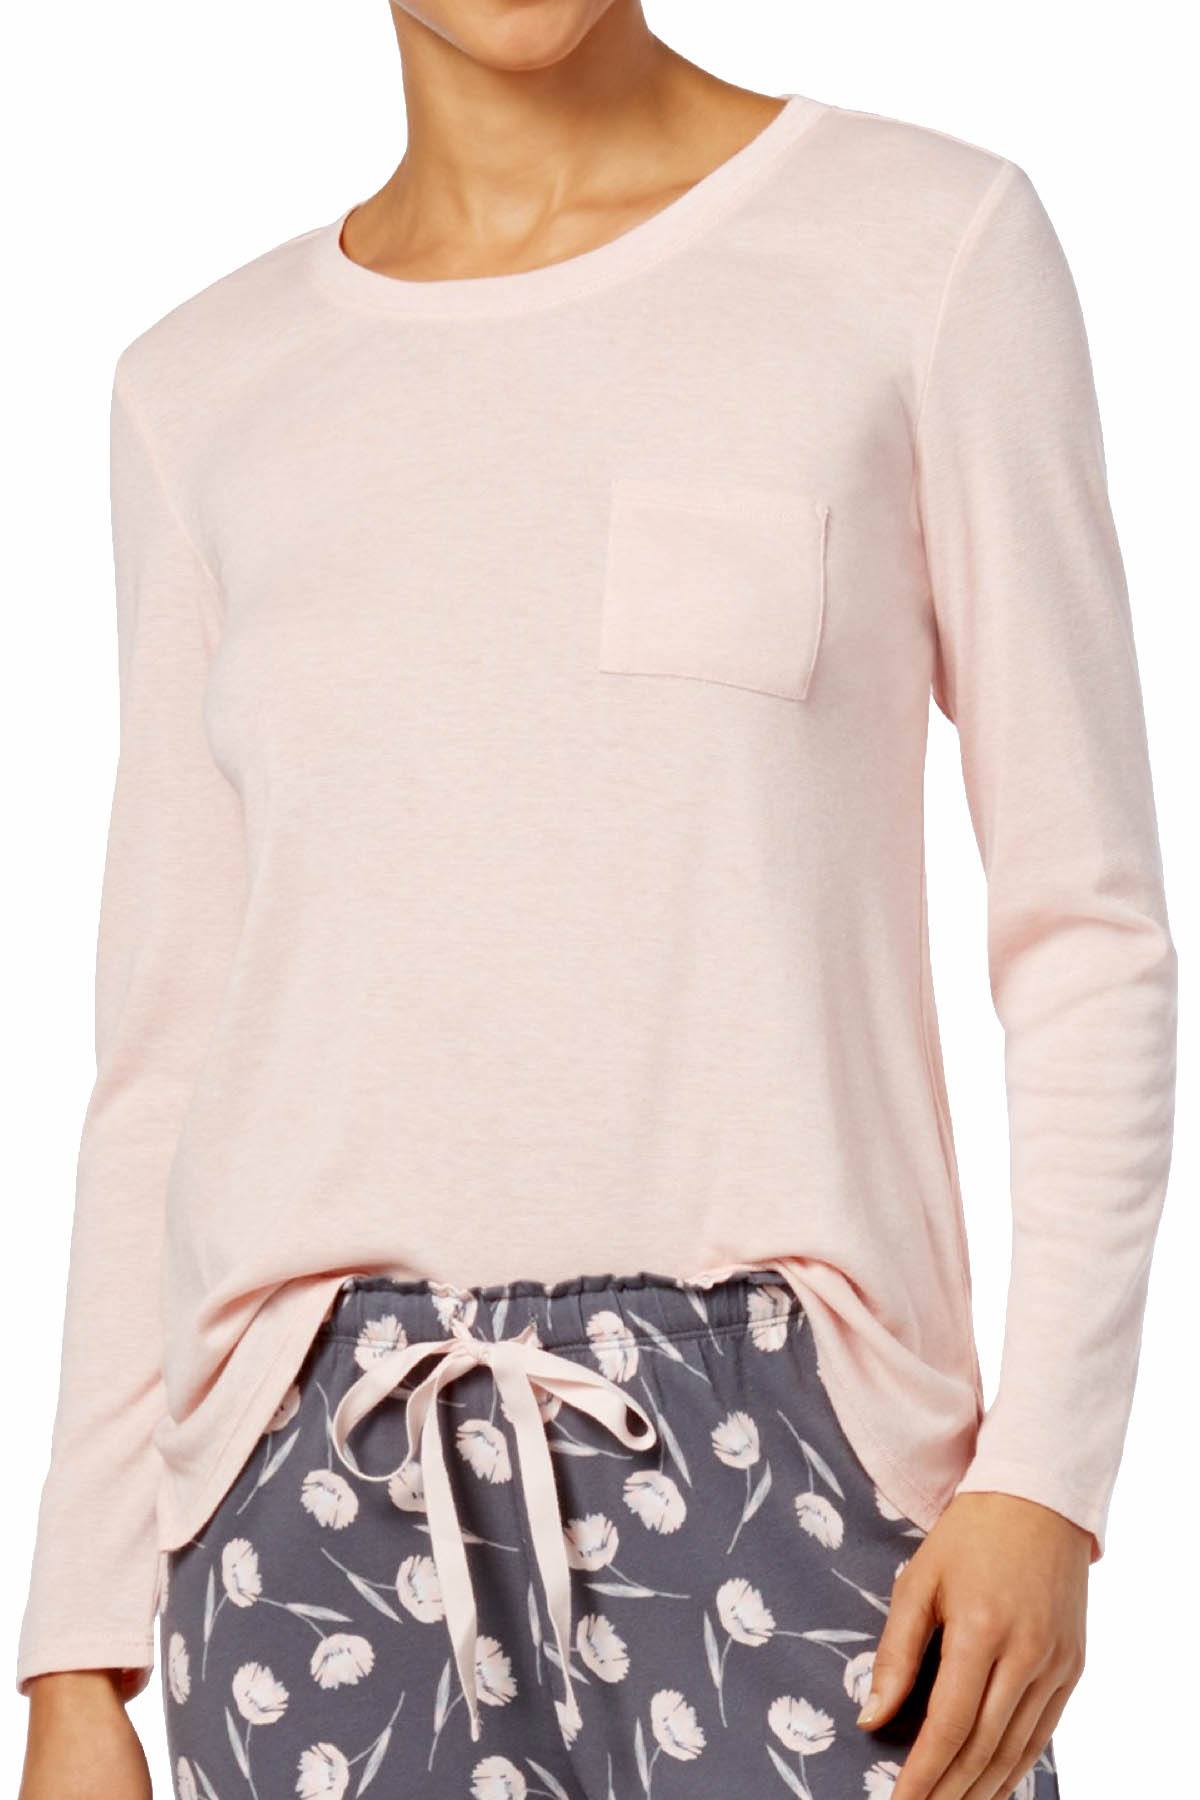 Alfani Long Sleeve Scoop Neck Top in Soft Shell Pink